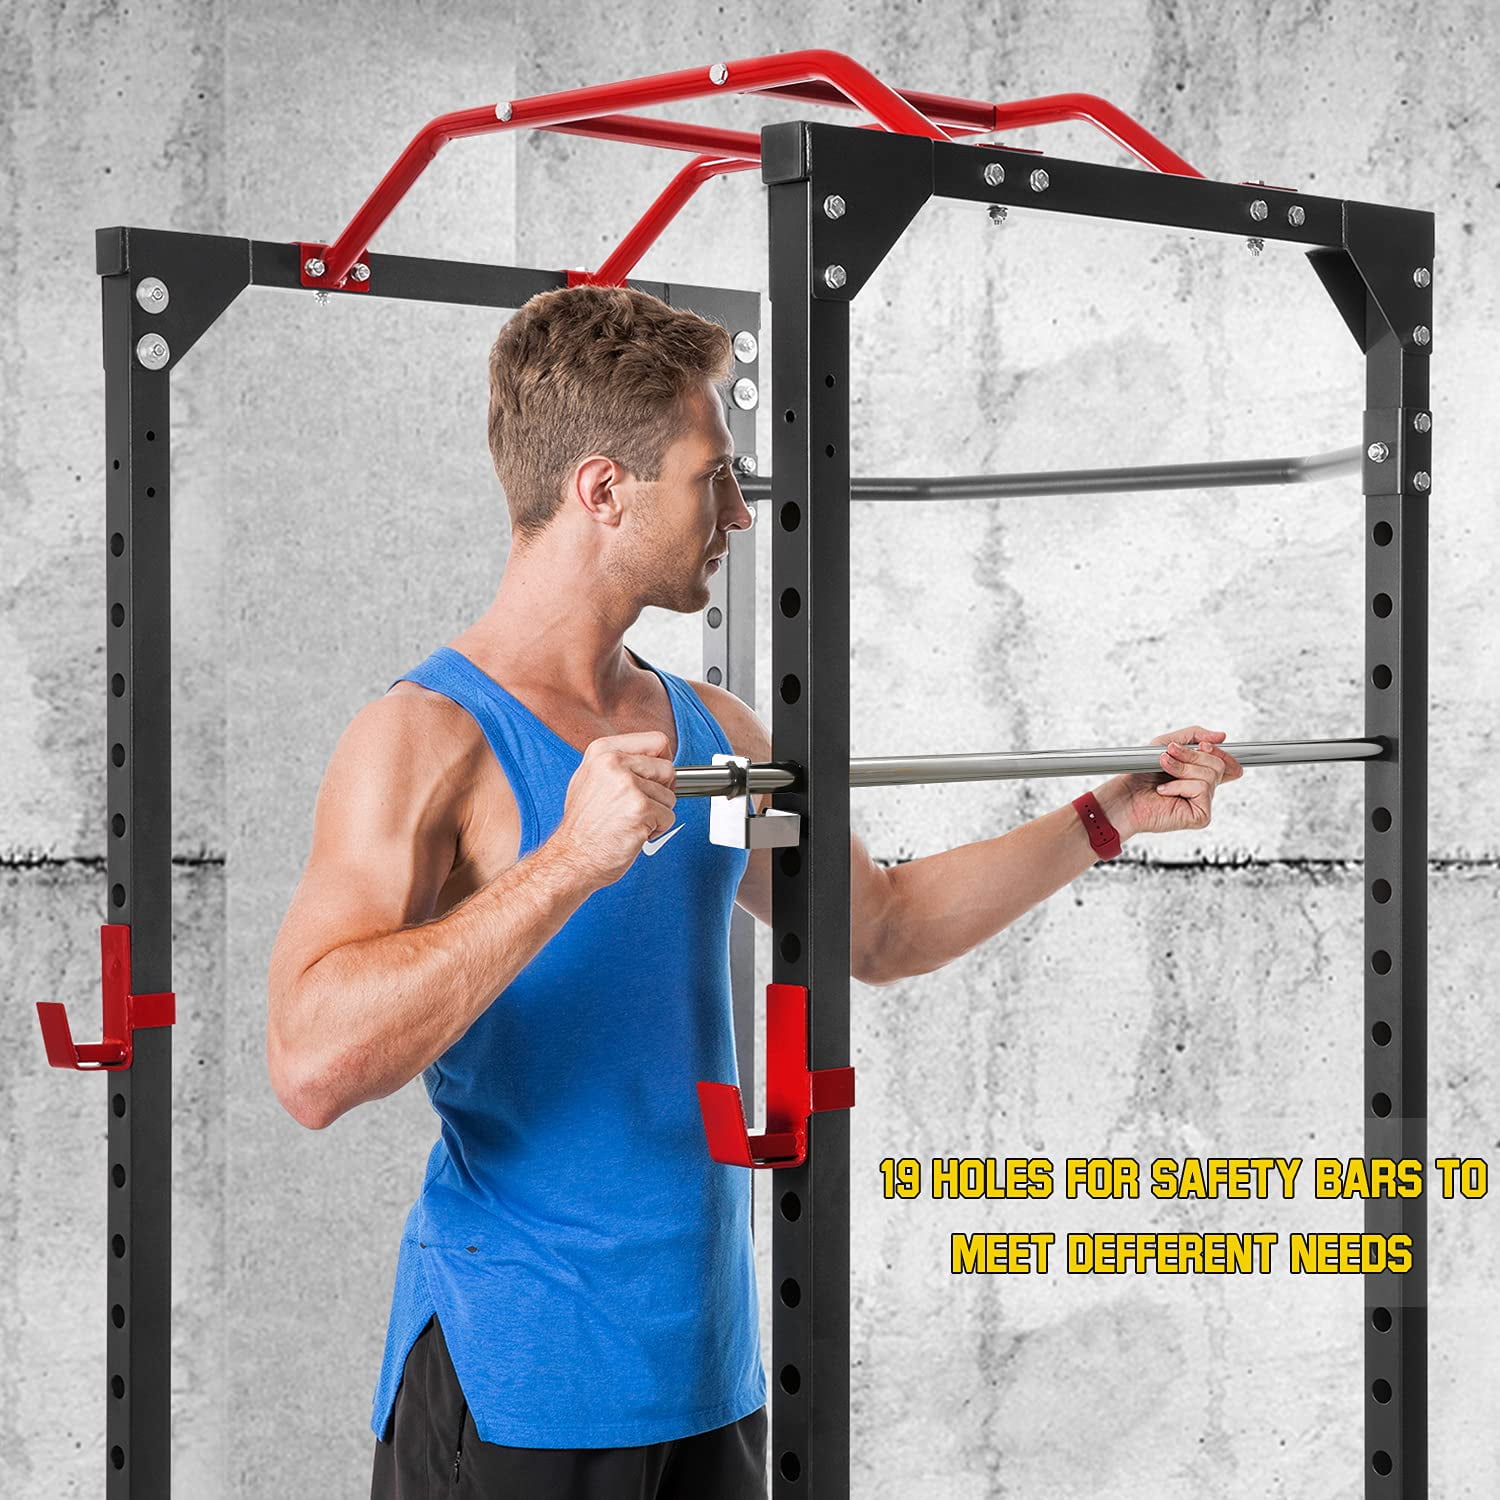 Mousport Power Cage Squat Rack Cage Weight Cage Power Rack Home Gym with 19-Level Adjustable and J-Hooks Heavy Duty for 1000 lbs Capacity for Barbell Lifting Squat Stand Push ups 